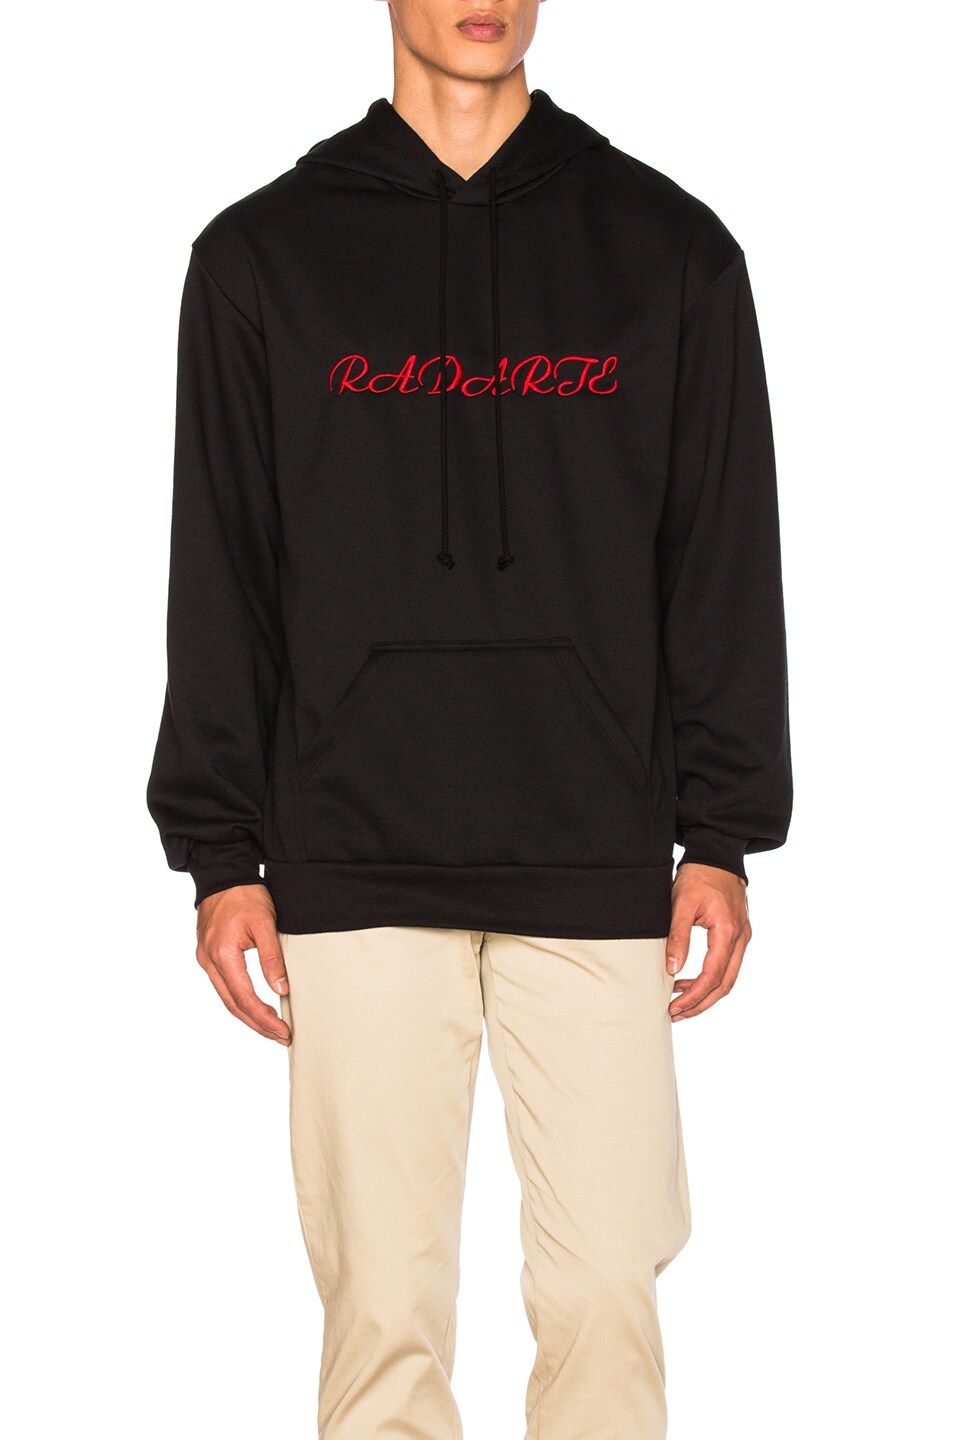 Image 1 of Rodarte LA Embroidery Oversized Hoodie in Black with Red Text